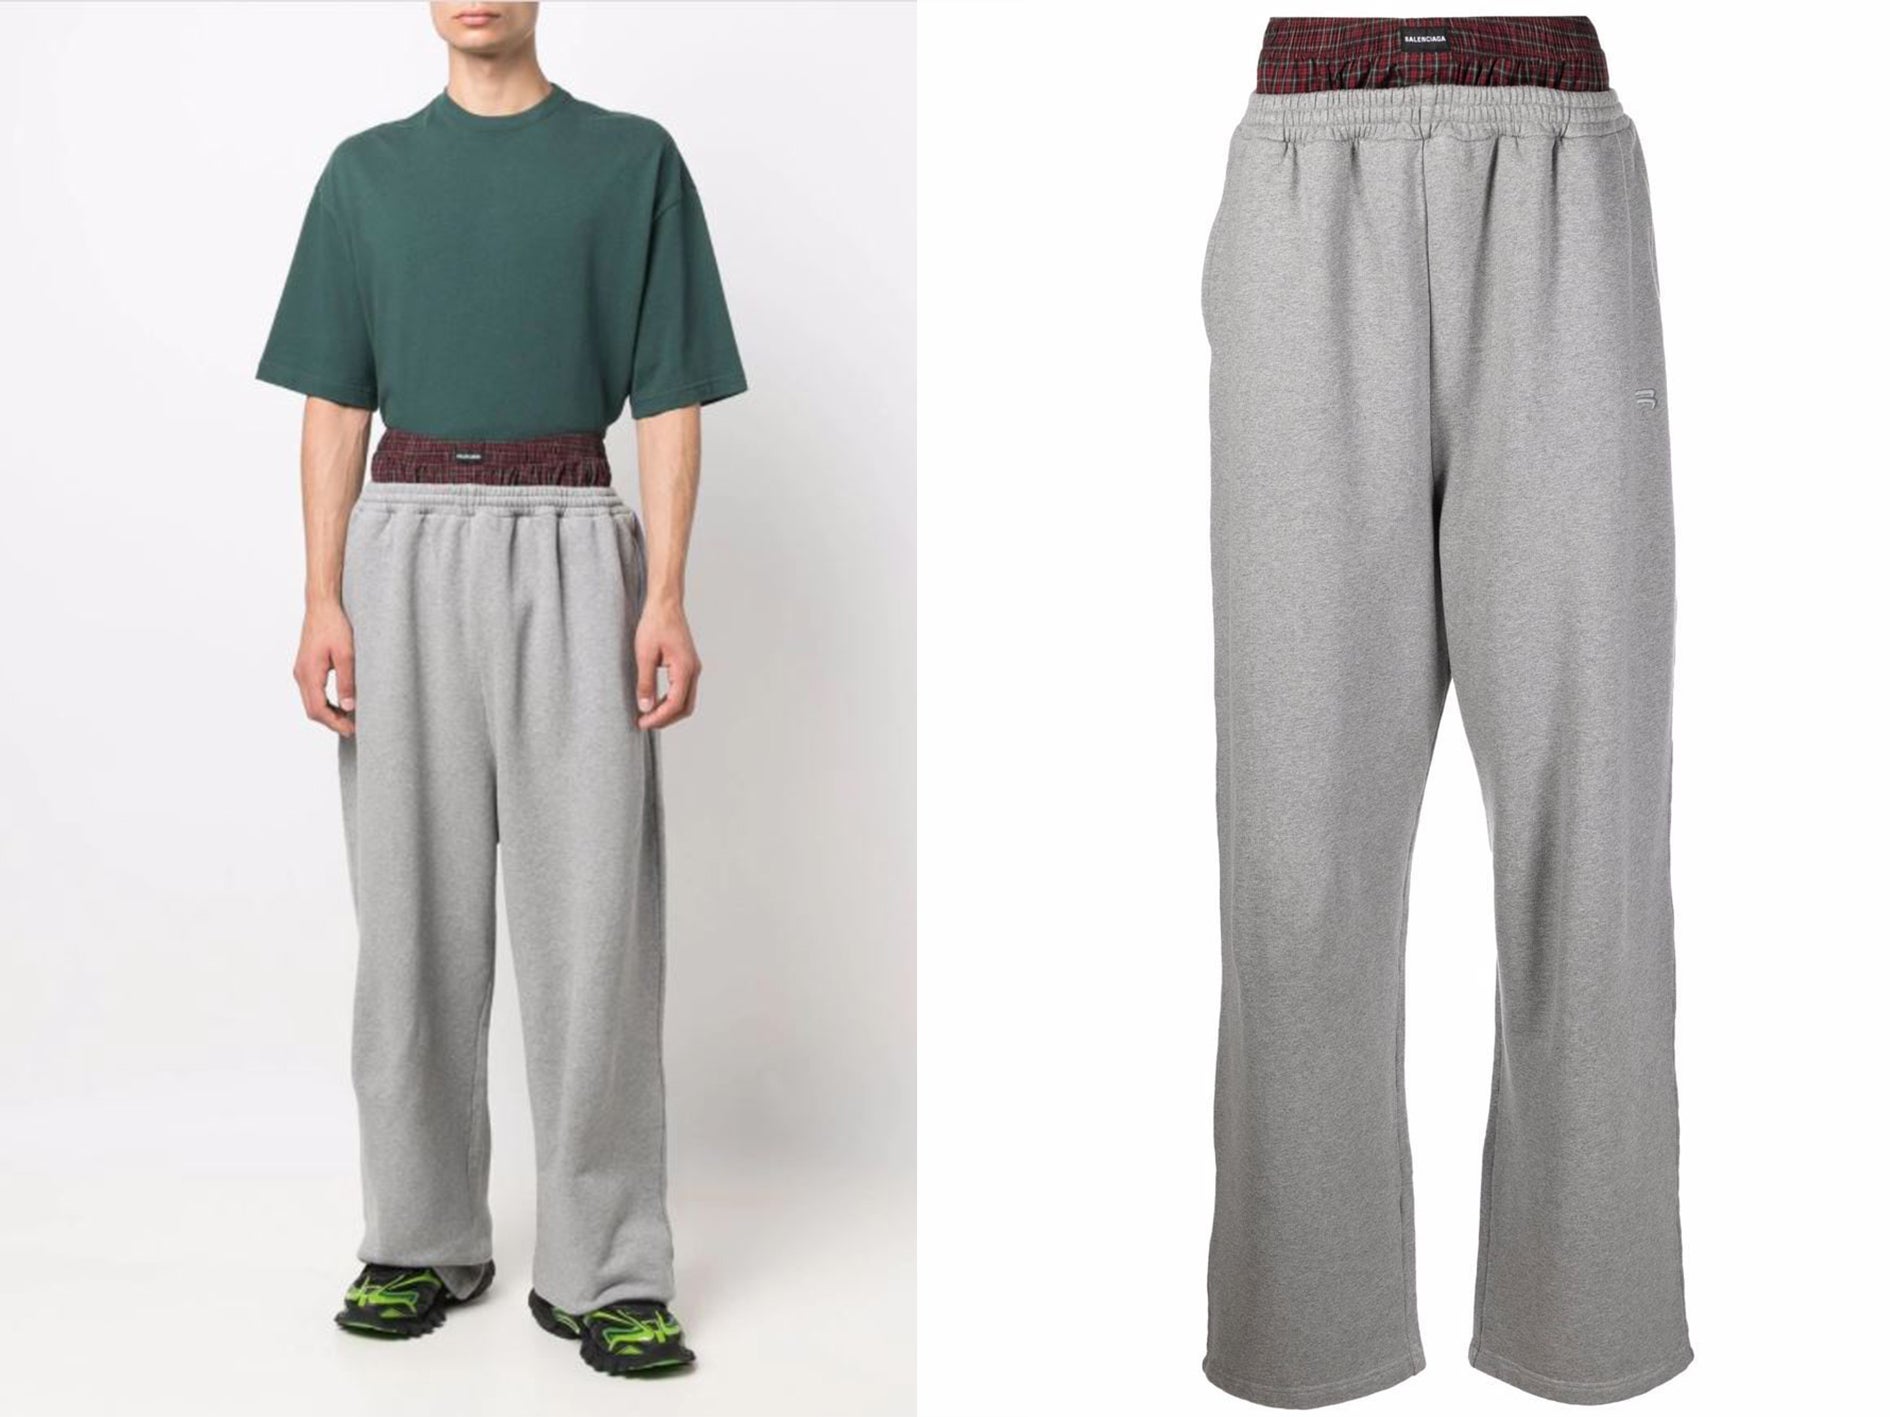 Sagging Pants Are Outlawed: What Other Fashion Faux Pas Should Be Banned?